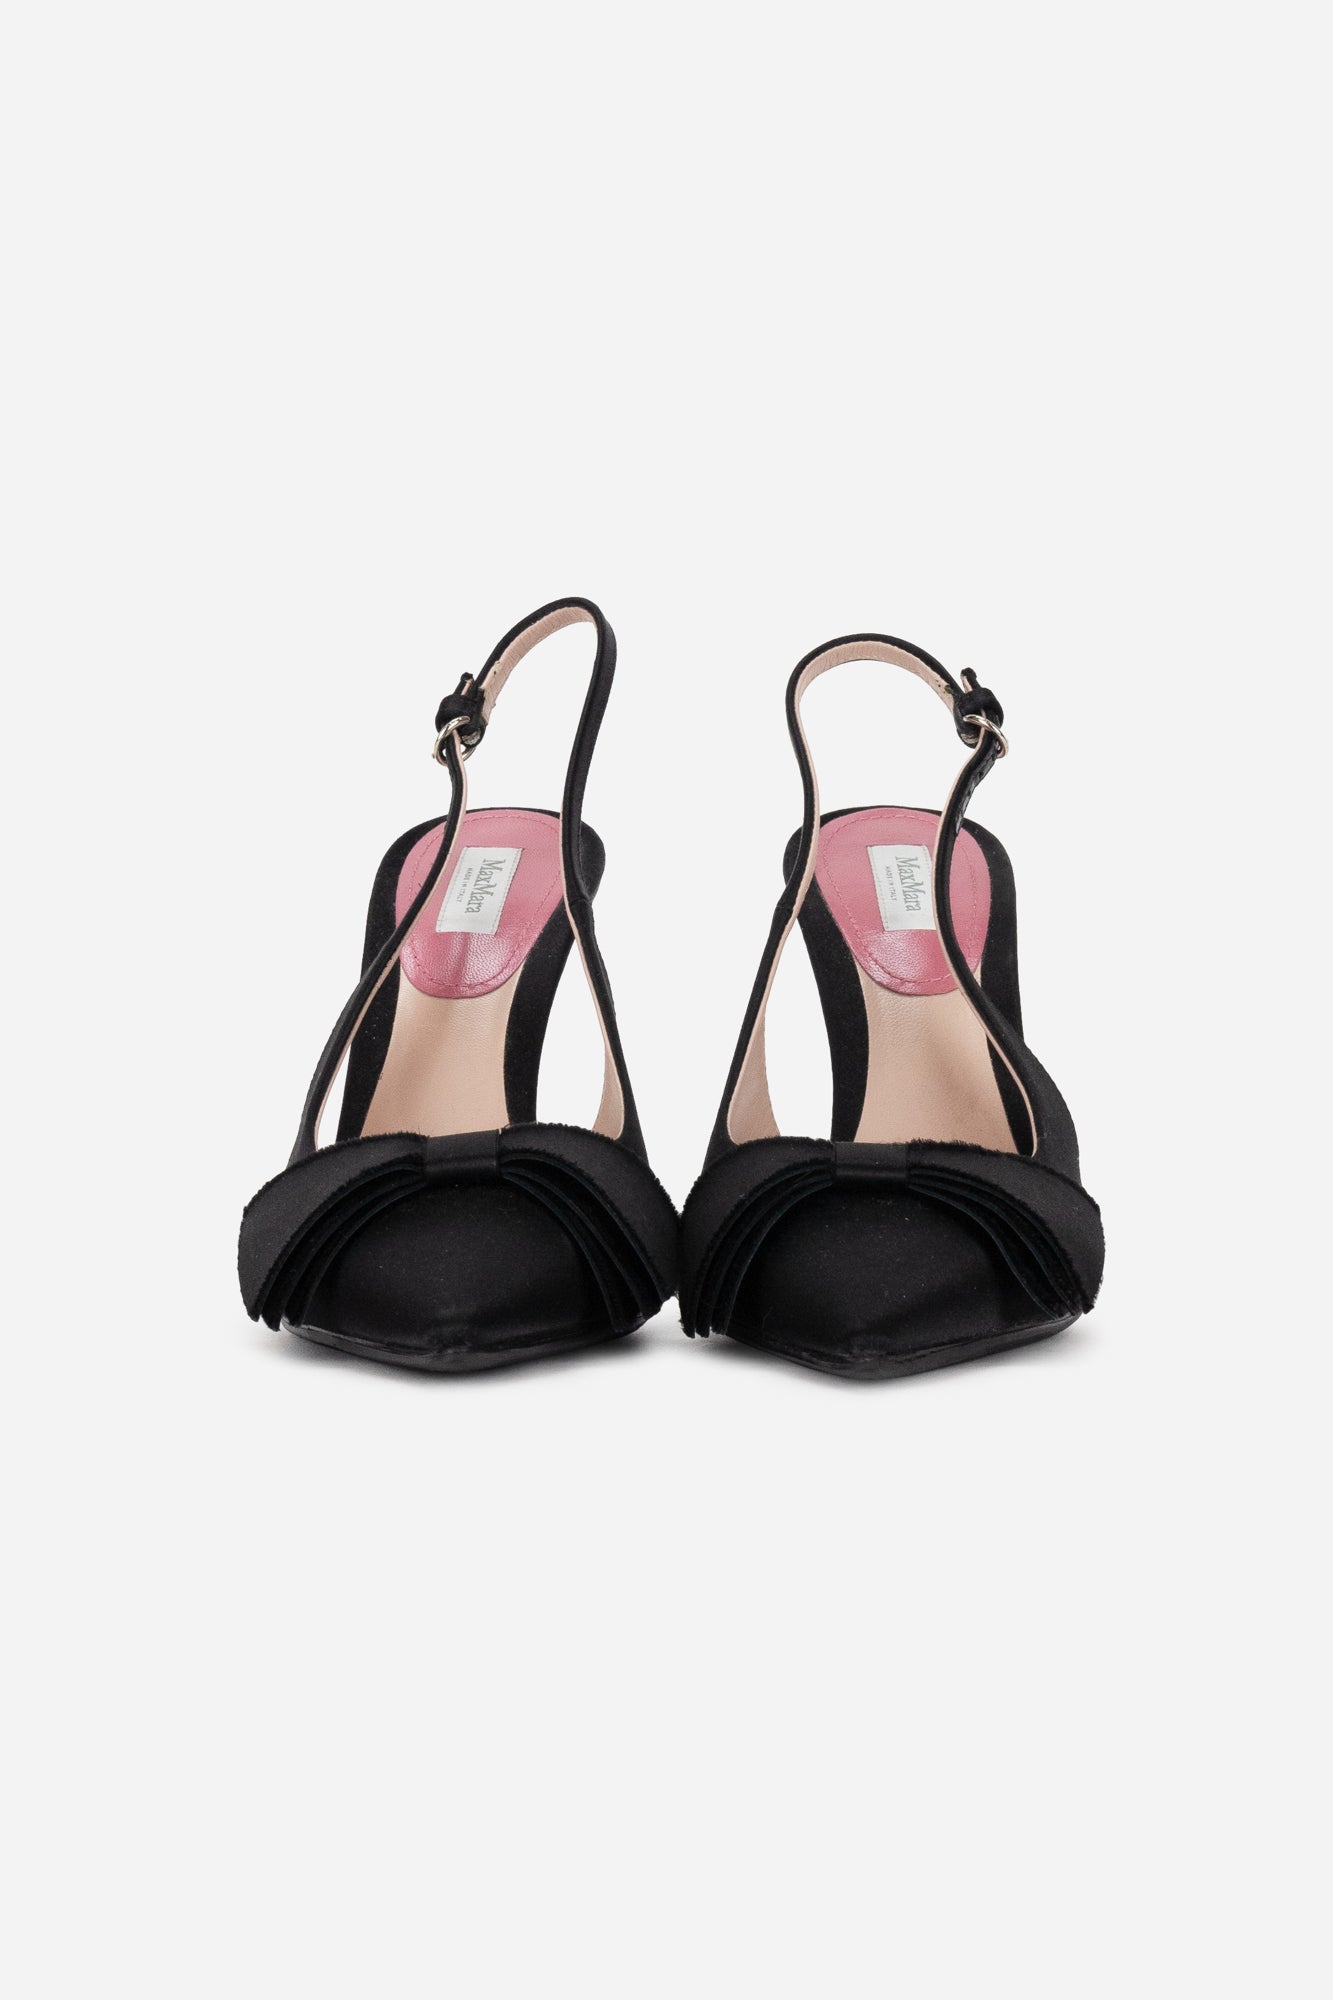 Black Satin Slingback Pointed Toe Pumps with Bow Detail